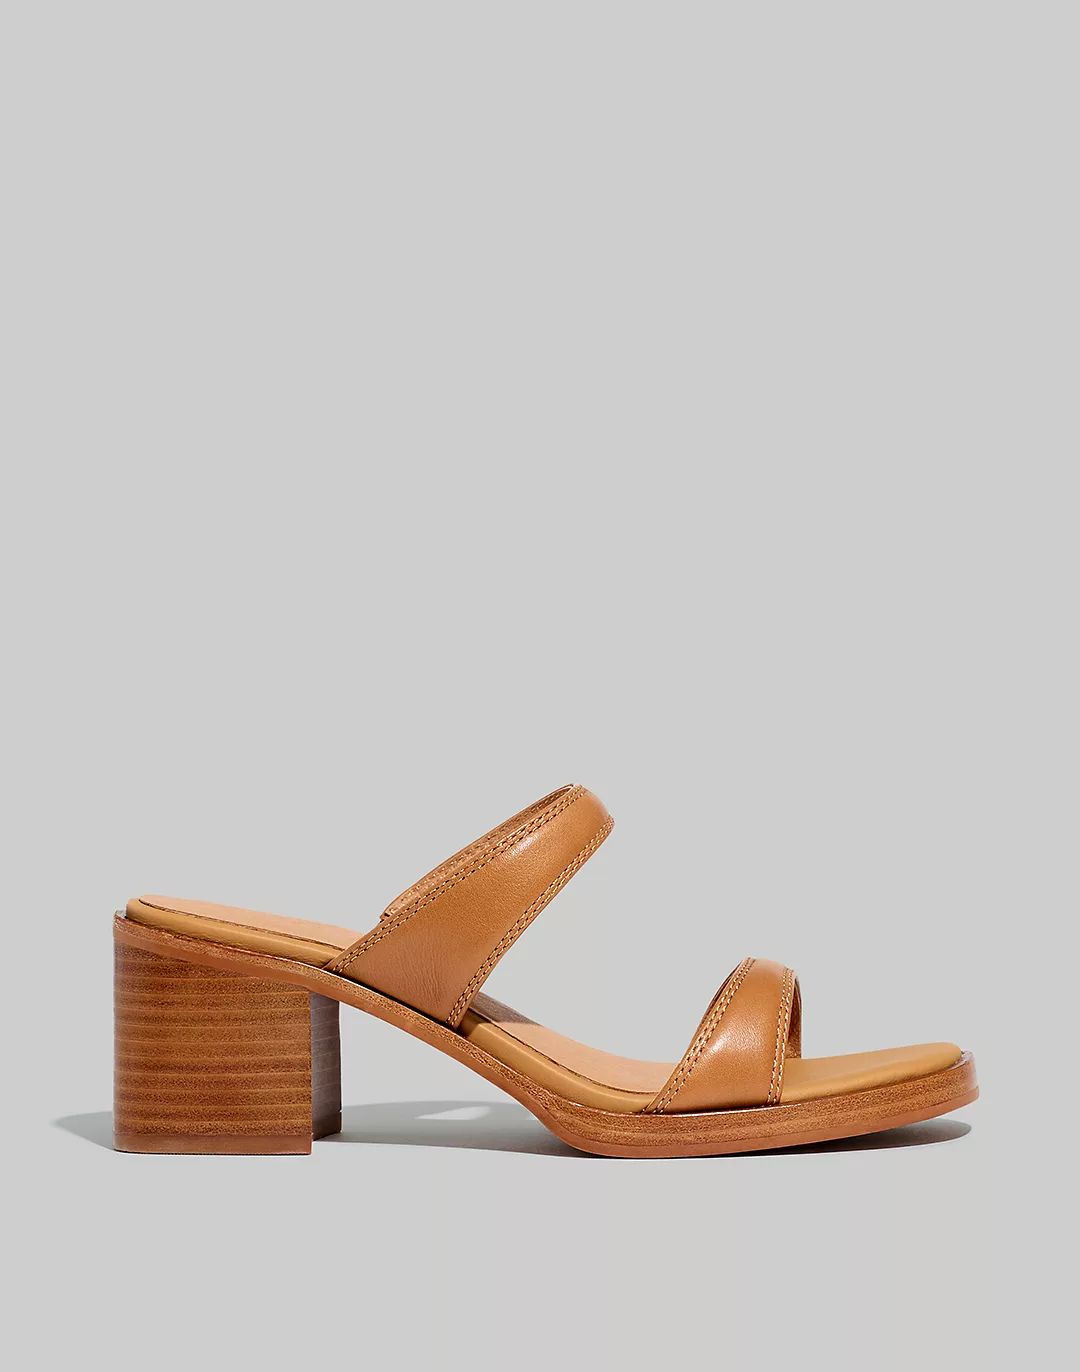 The Saige Double-Strap Sandal in Leather | Madewell